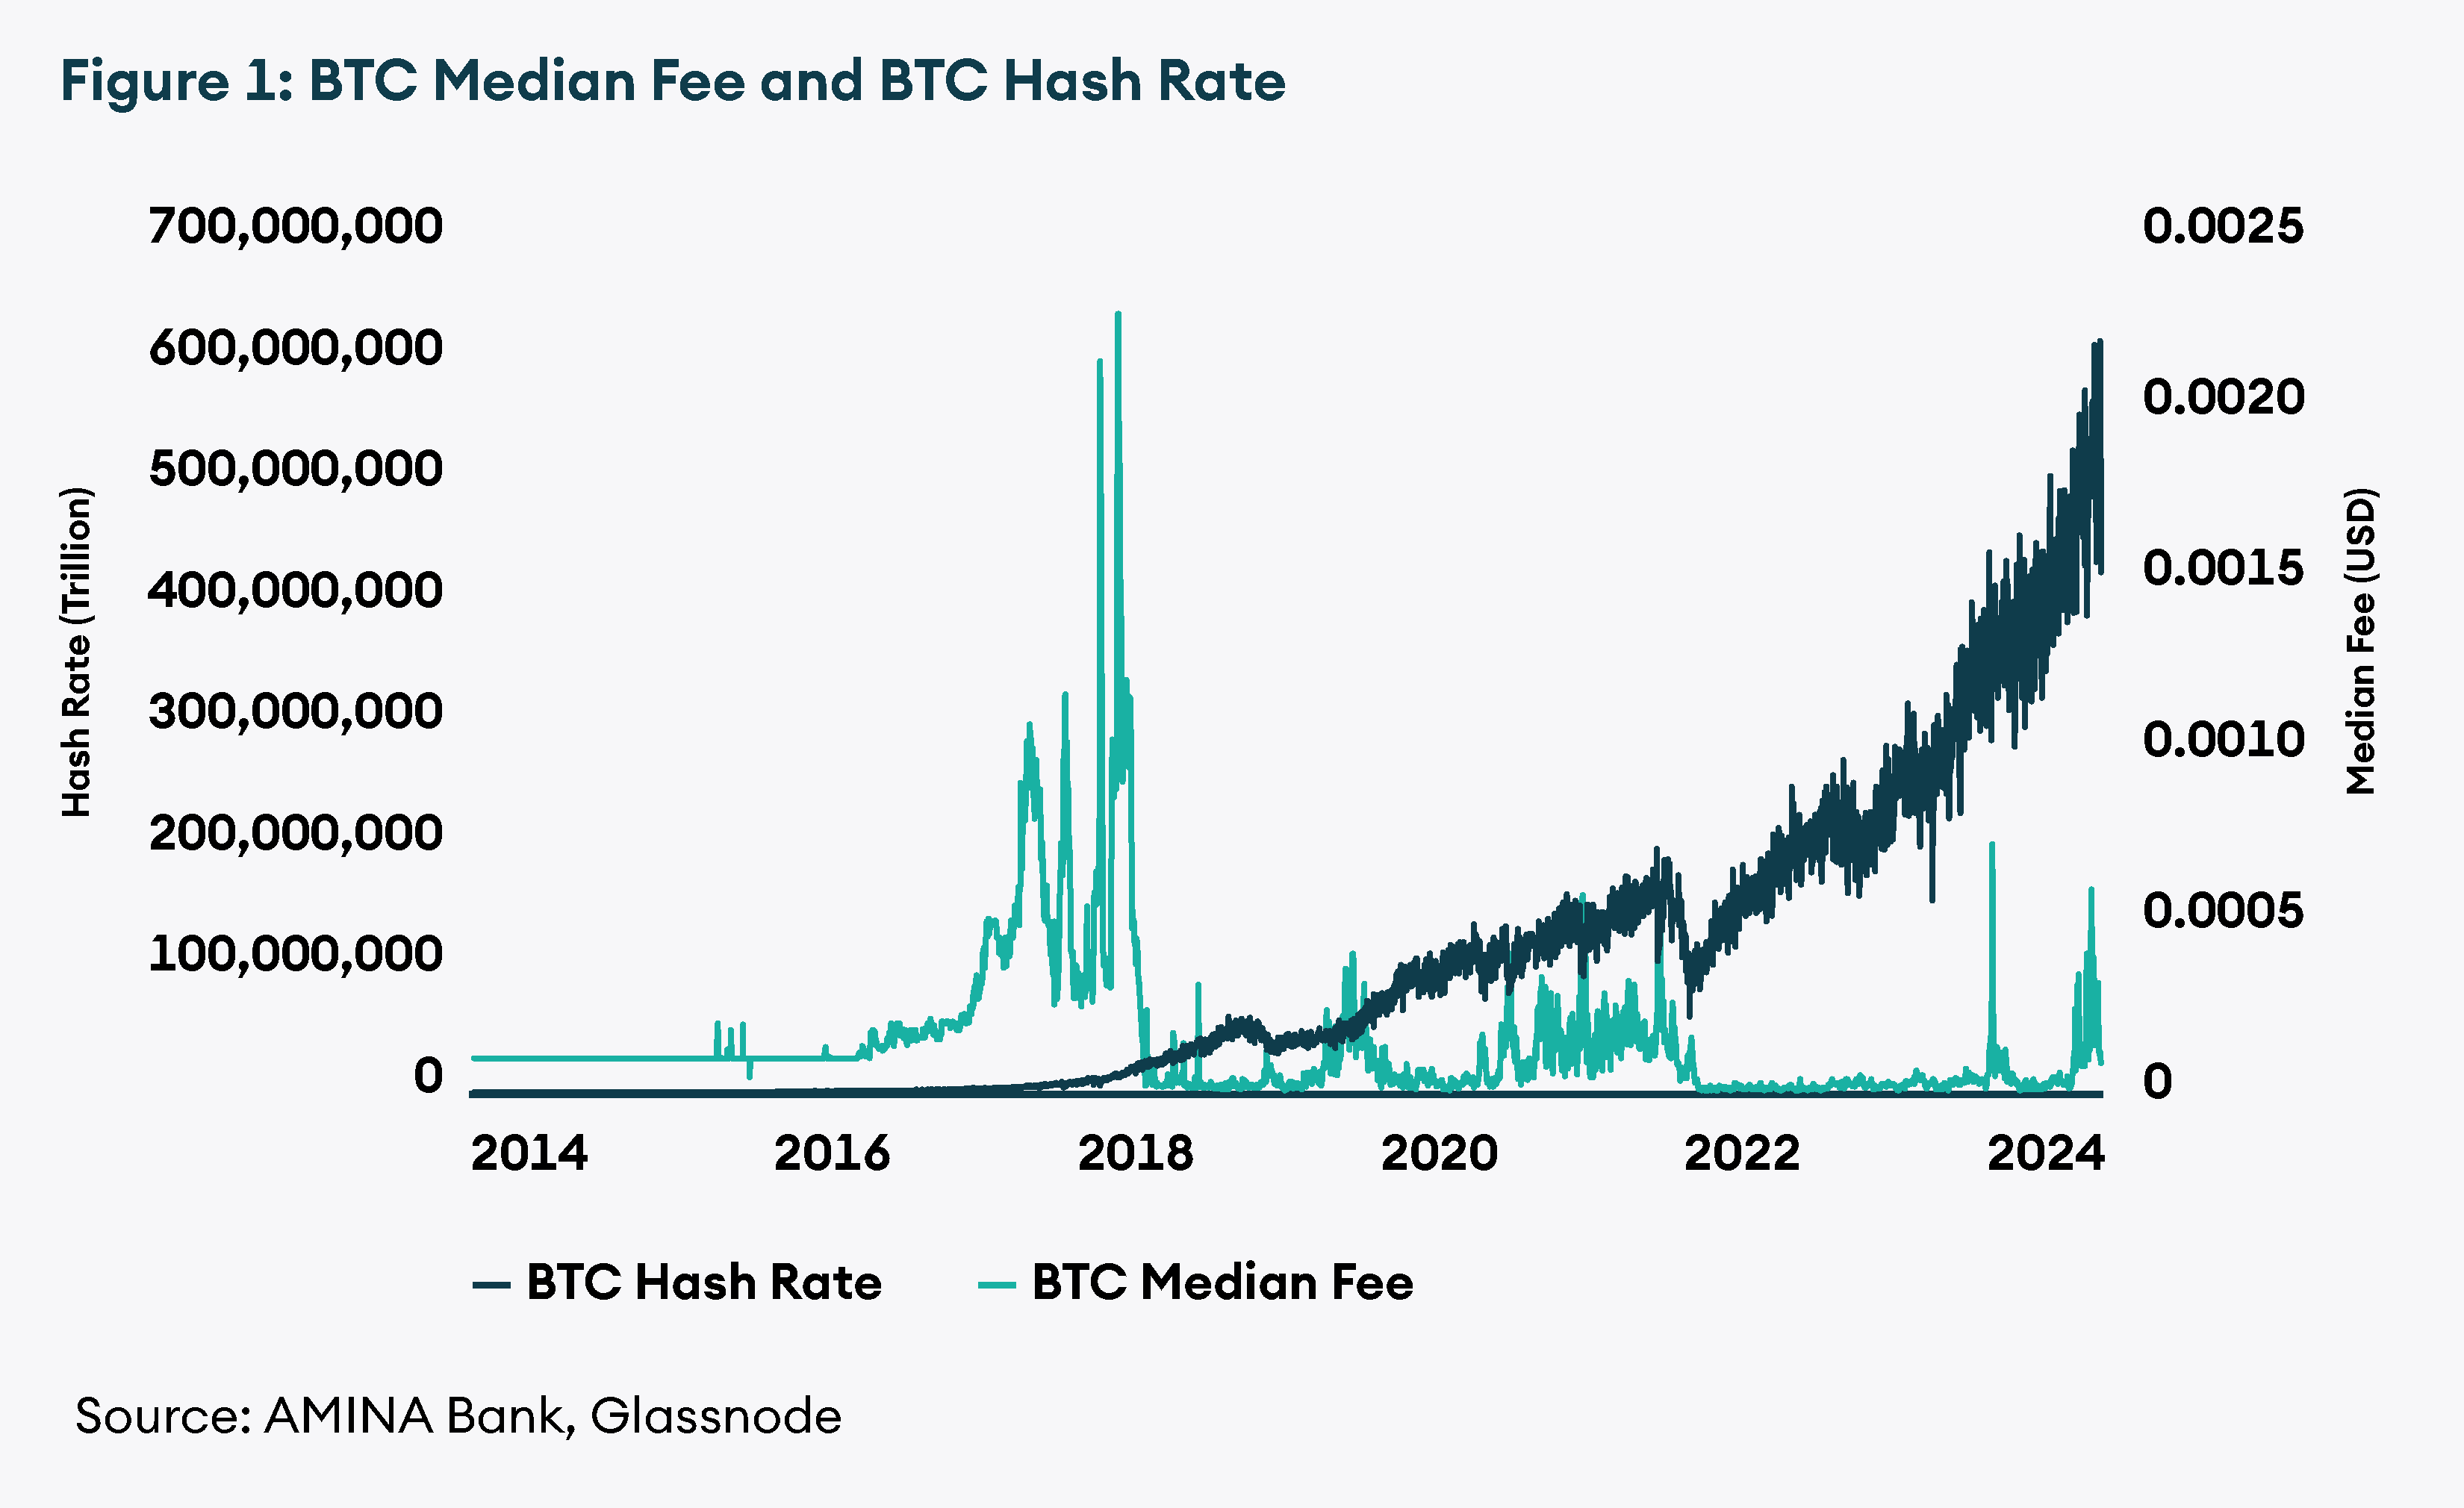 BTC Median Fee and BTC Hash Rate